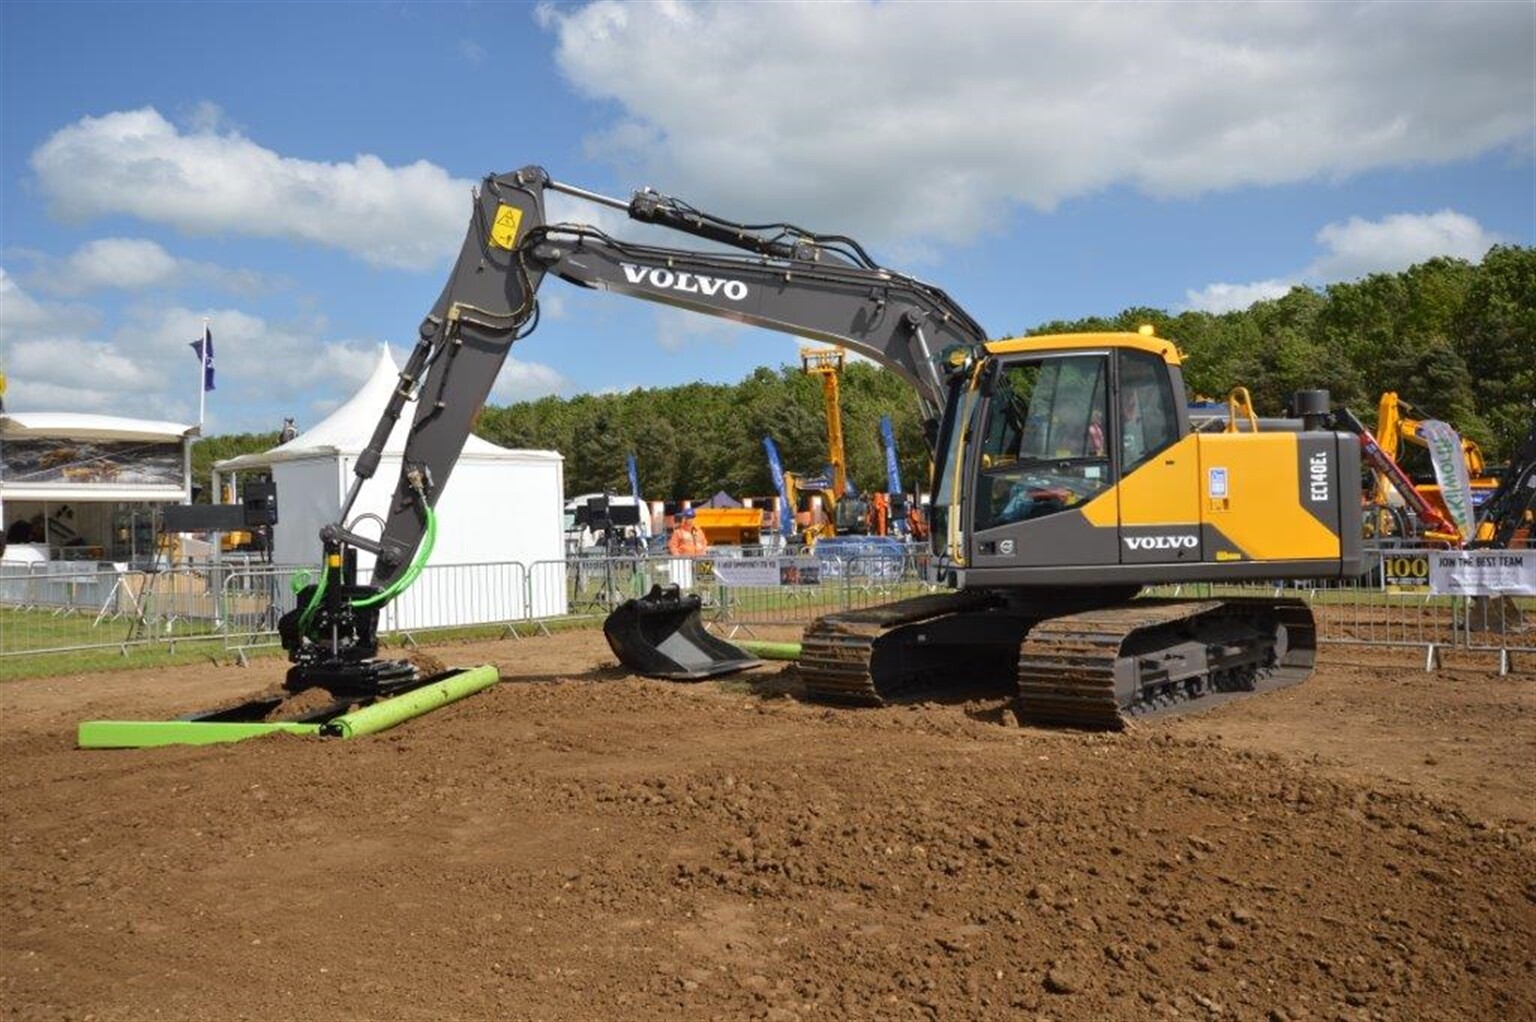 Plantworx 2017 Open for Business!